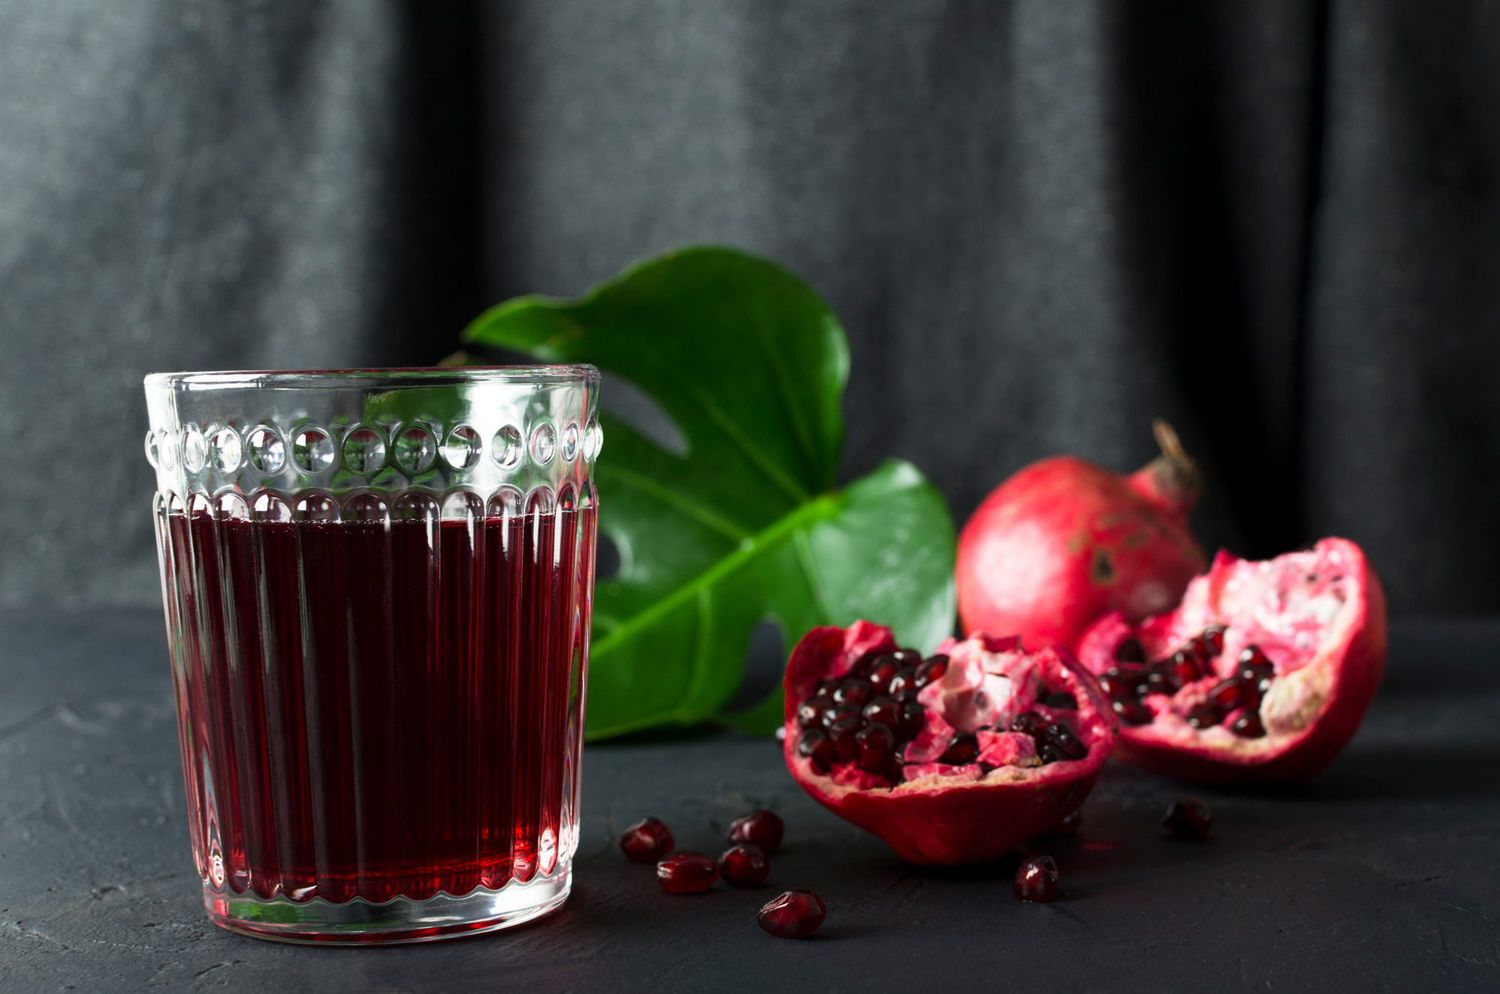 Stylish glass of delicious pomegranate juice, pomegranate seeds and tropical leaf on the dark table against grey background